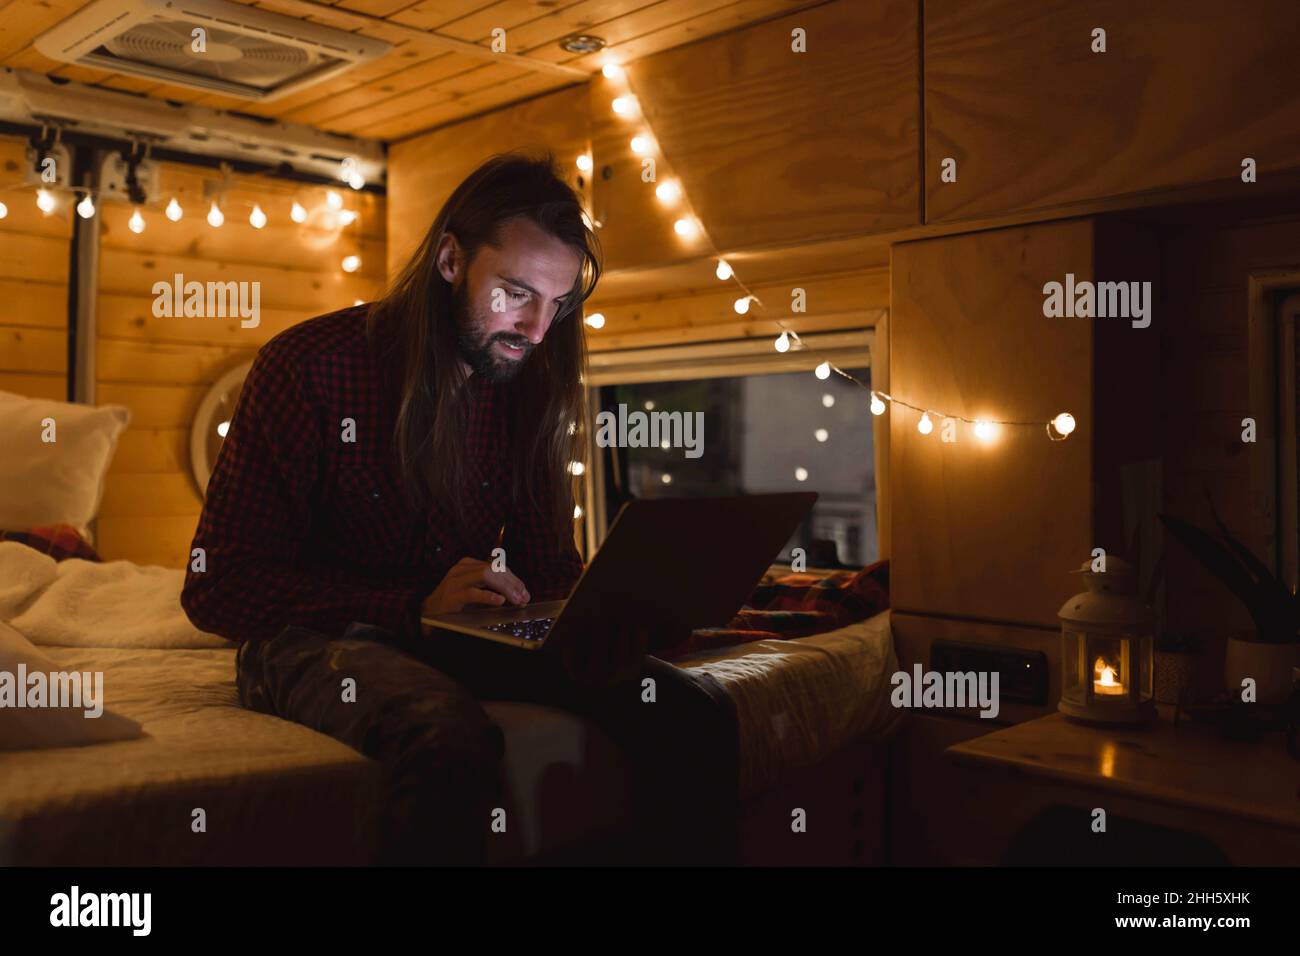 Young man using laptop in van on Christmas vacation Stock Photo